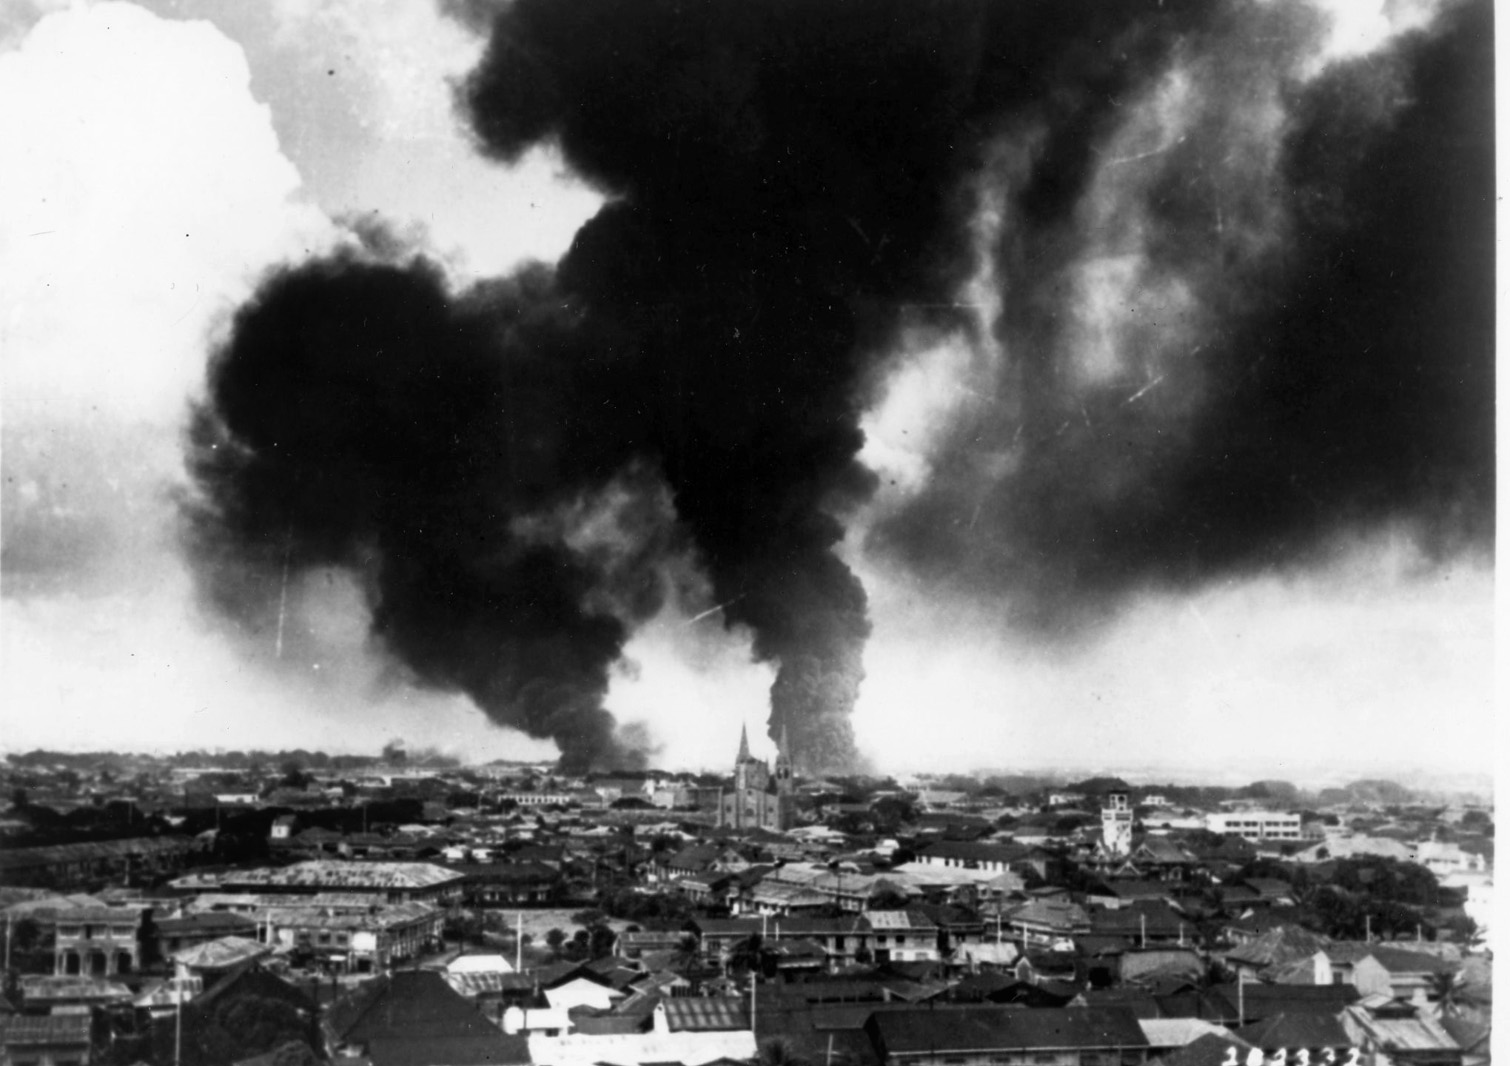 Smoke rises from demolished buildings in the Philippine capital of Manila following a December 1941 Japanese air raid. Manila was later declared an open city to avoid further damage.